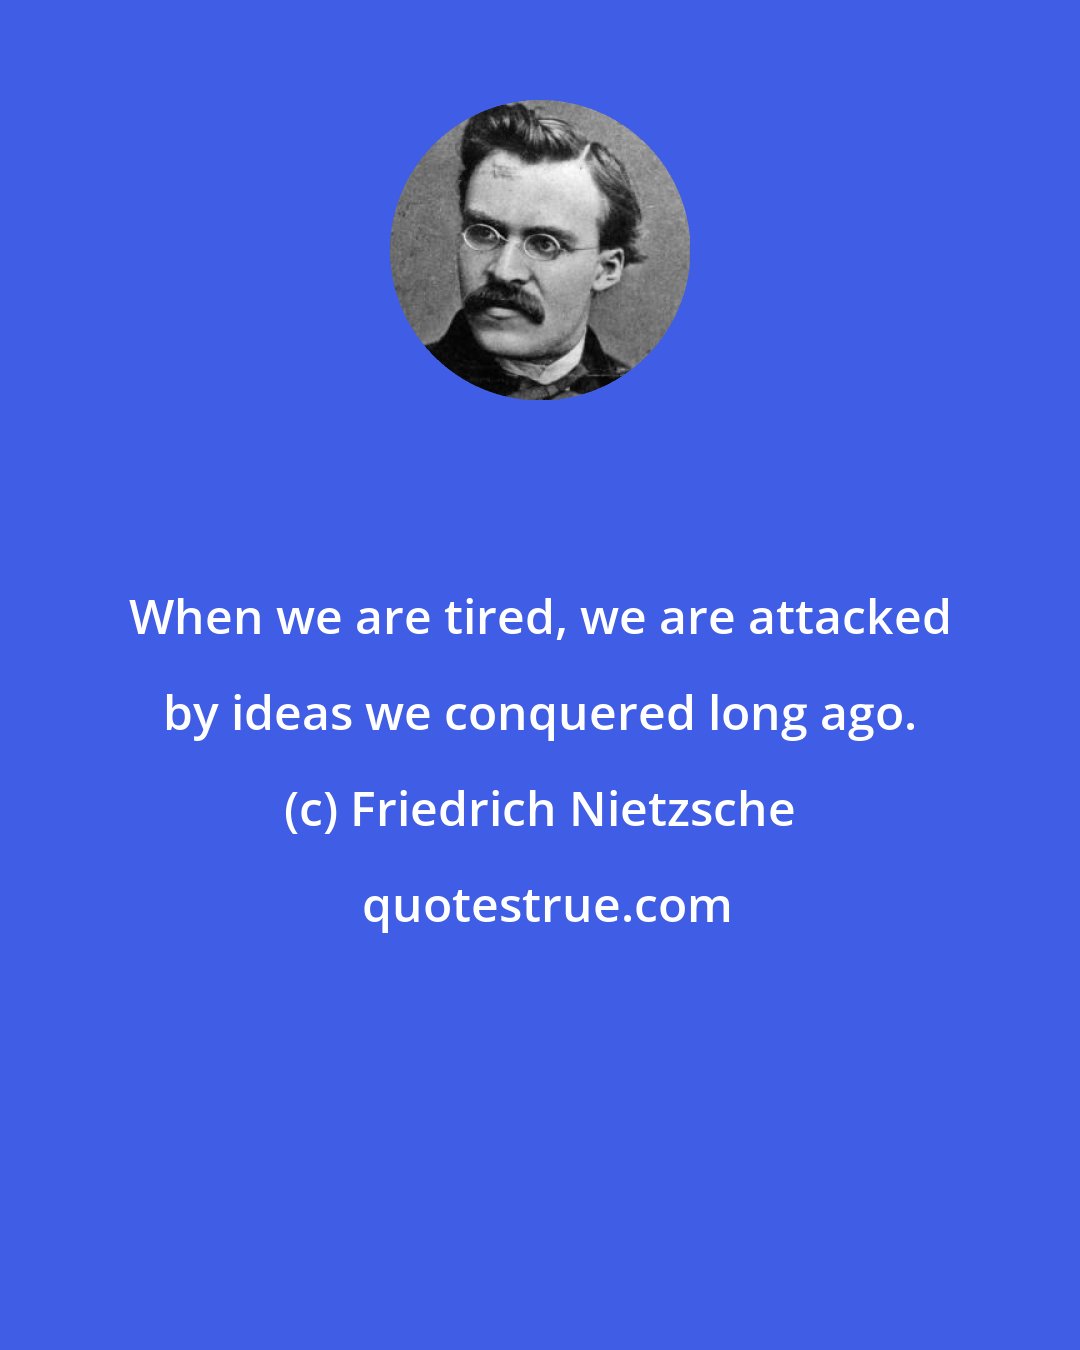 Friedrich Nietzsche: When we are tired, we are attacked by ideas we conquered long ago.